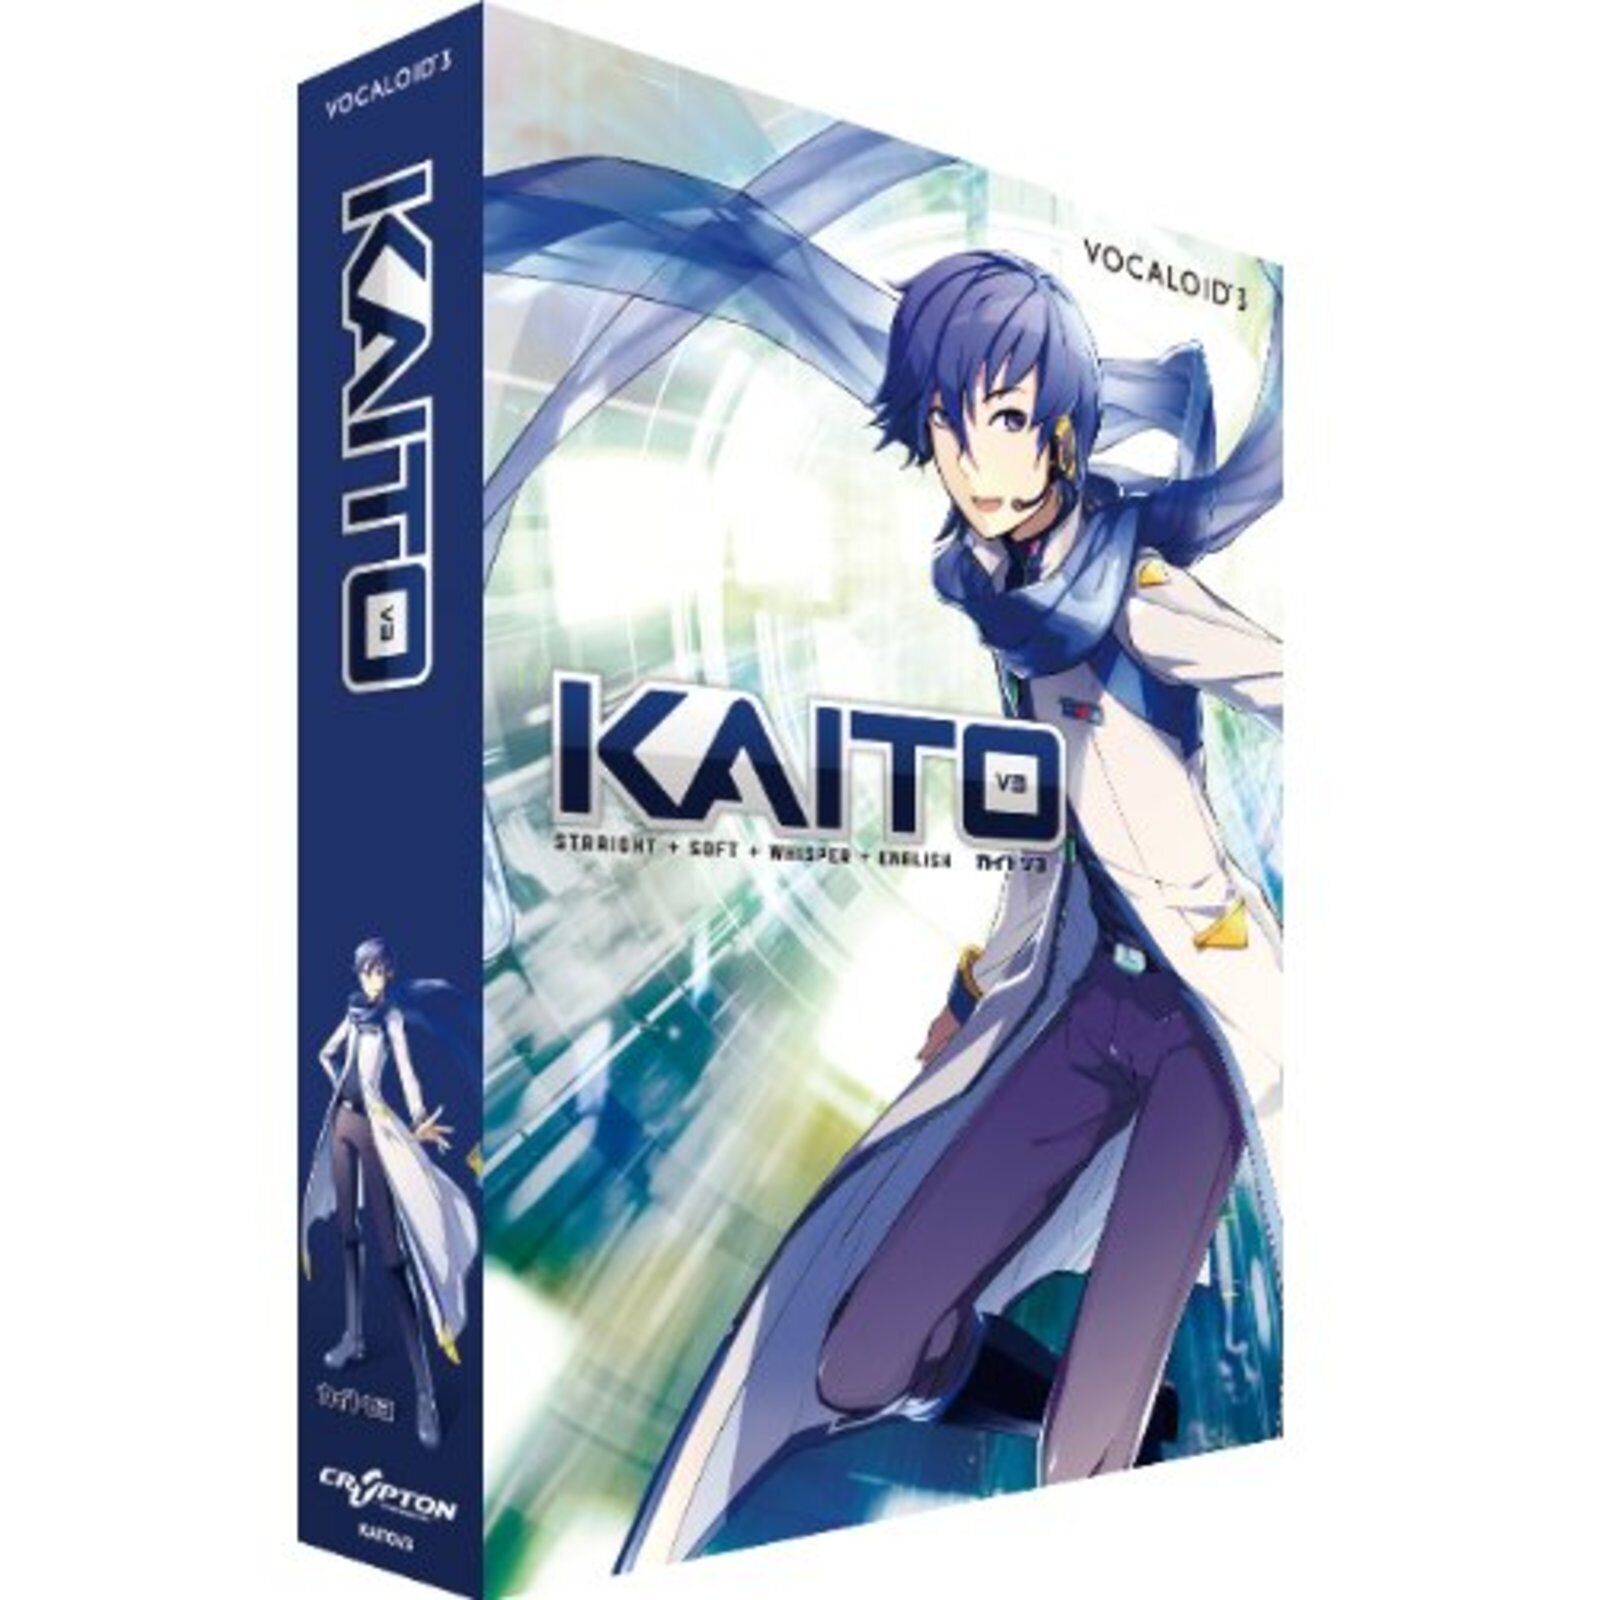 Vocaloid3 KAITO V3 for PC(Windows/Mac) with Tracking number New from Japan